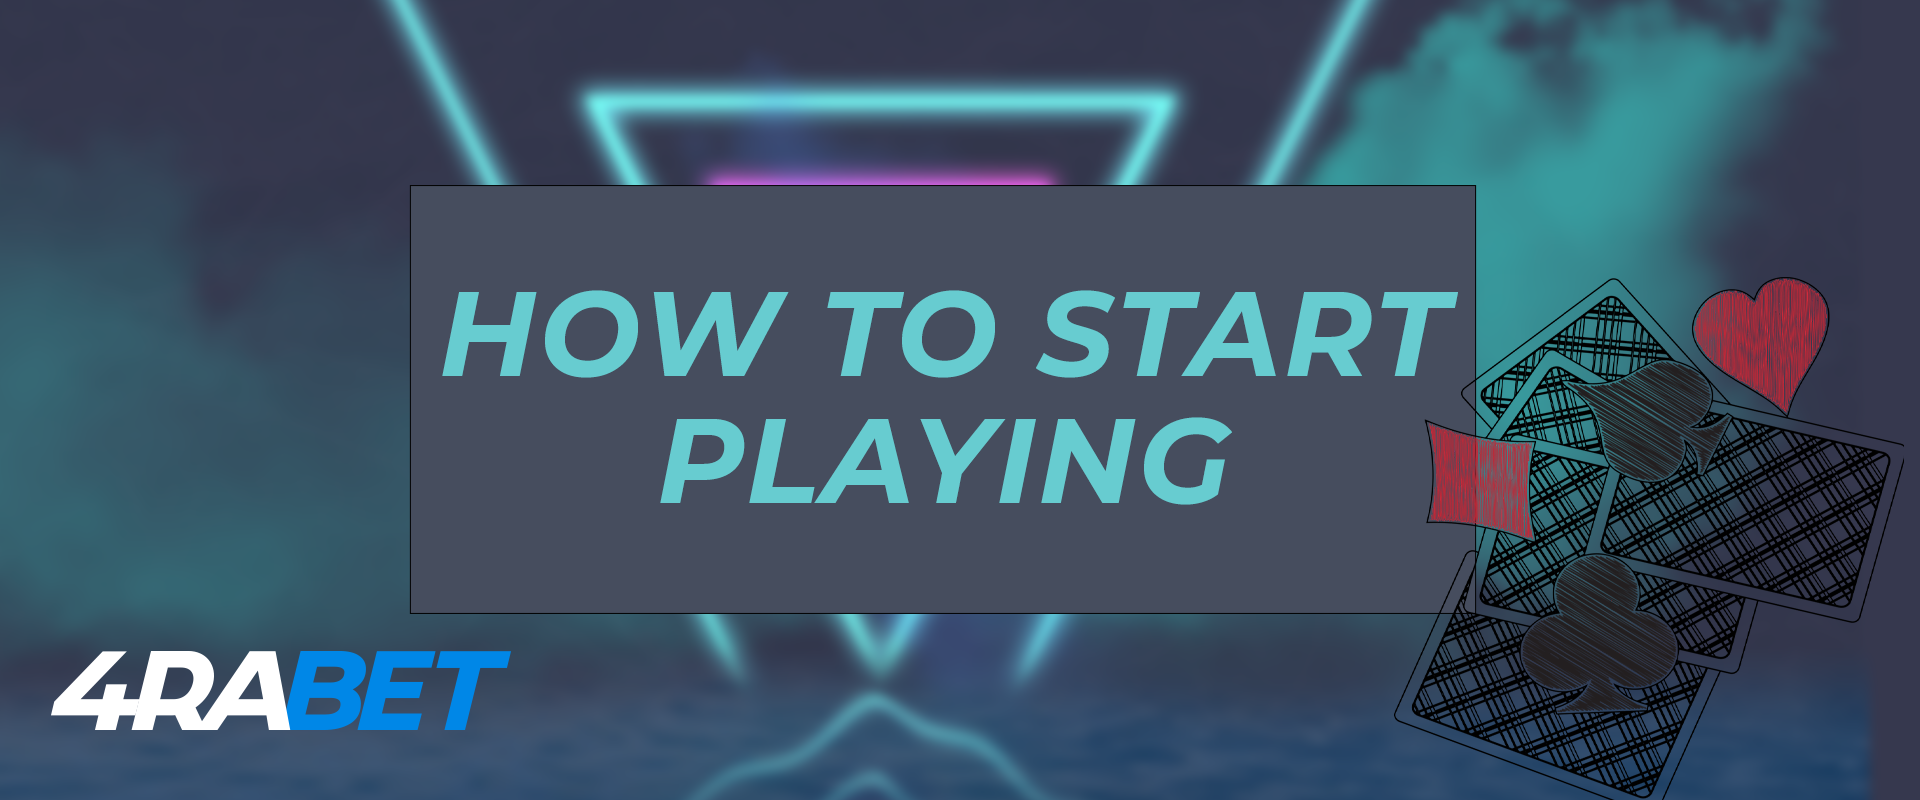 How to start playing on the 4rabet.